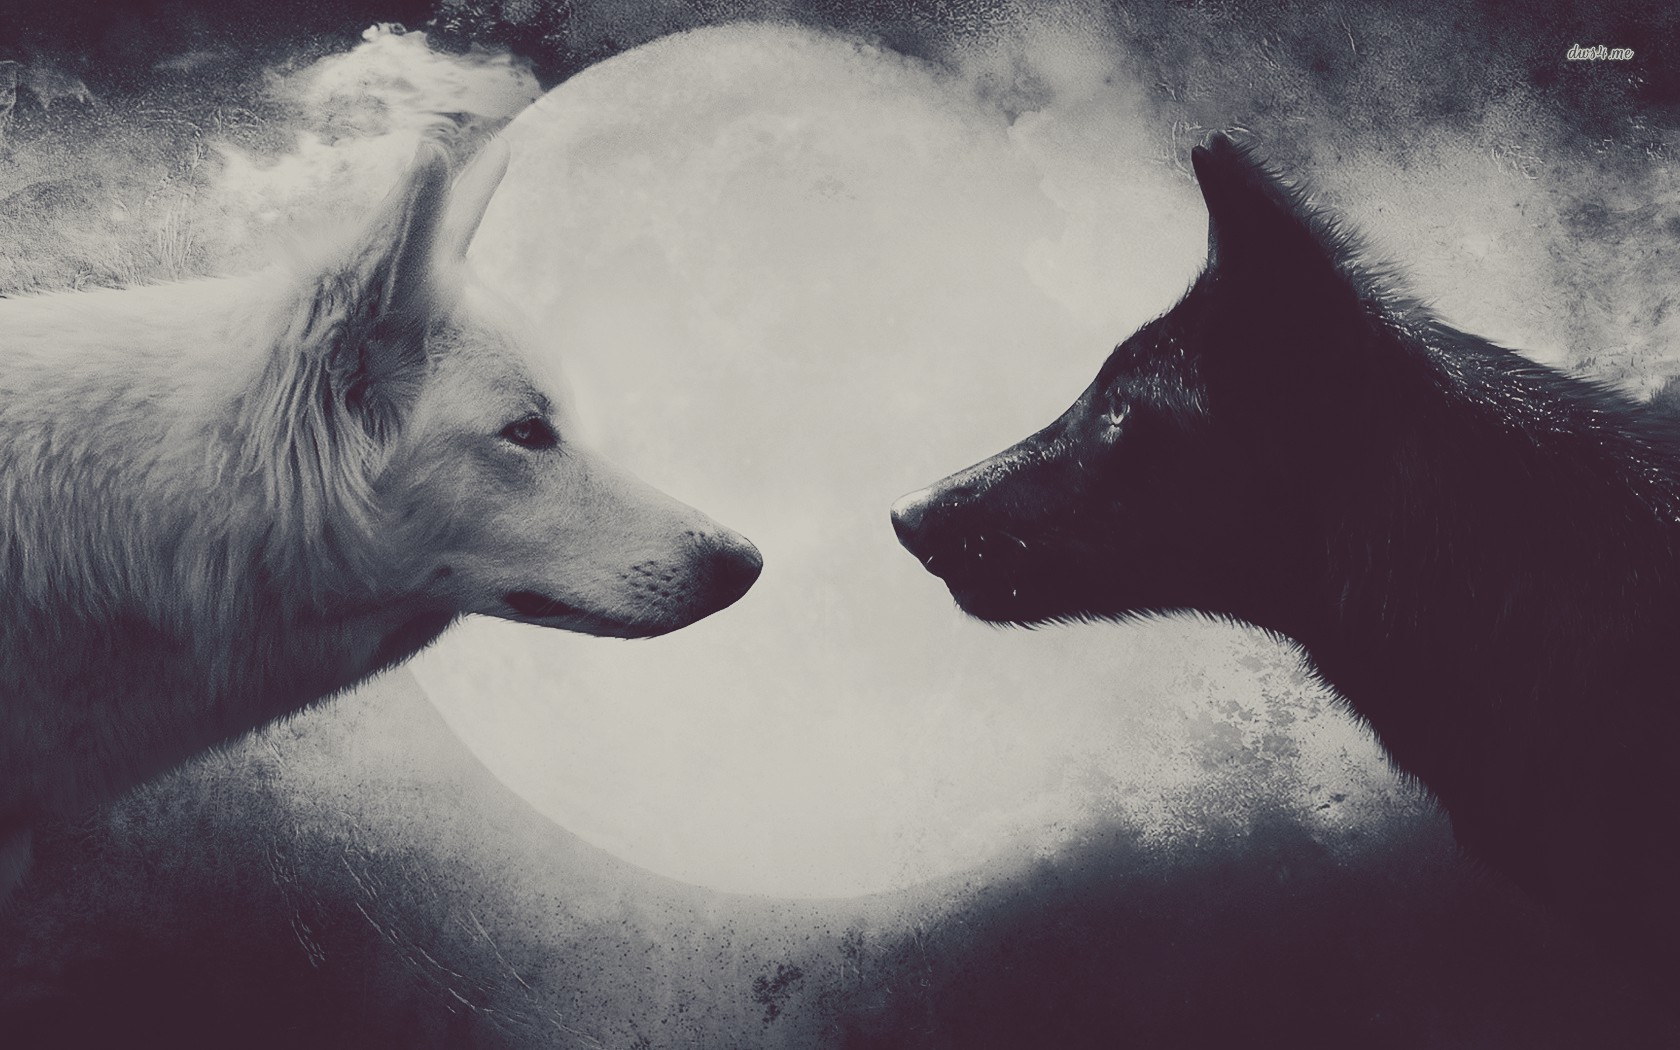 19358-a-black-and-a-white-wolf-1680x1050-artistic-wallpaper.jpg